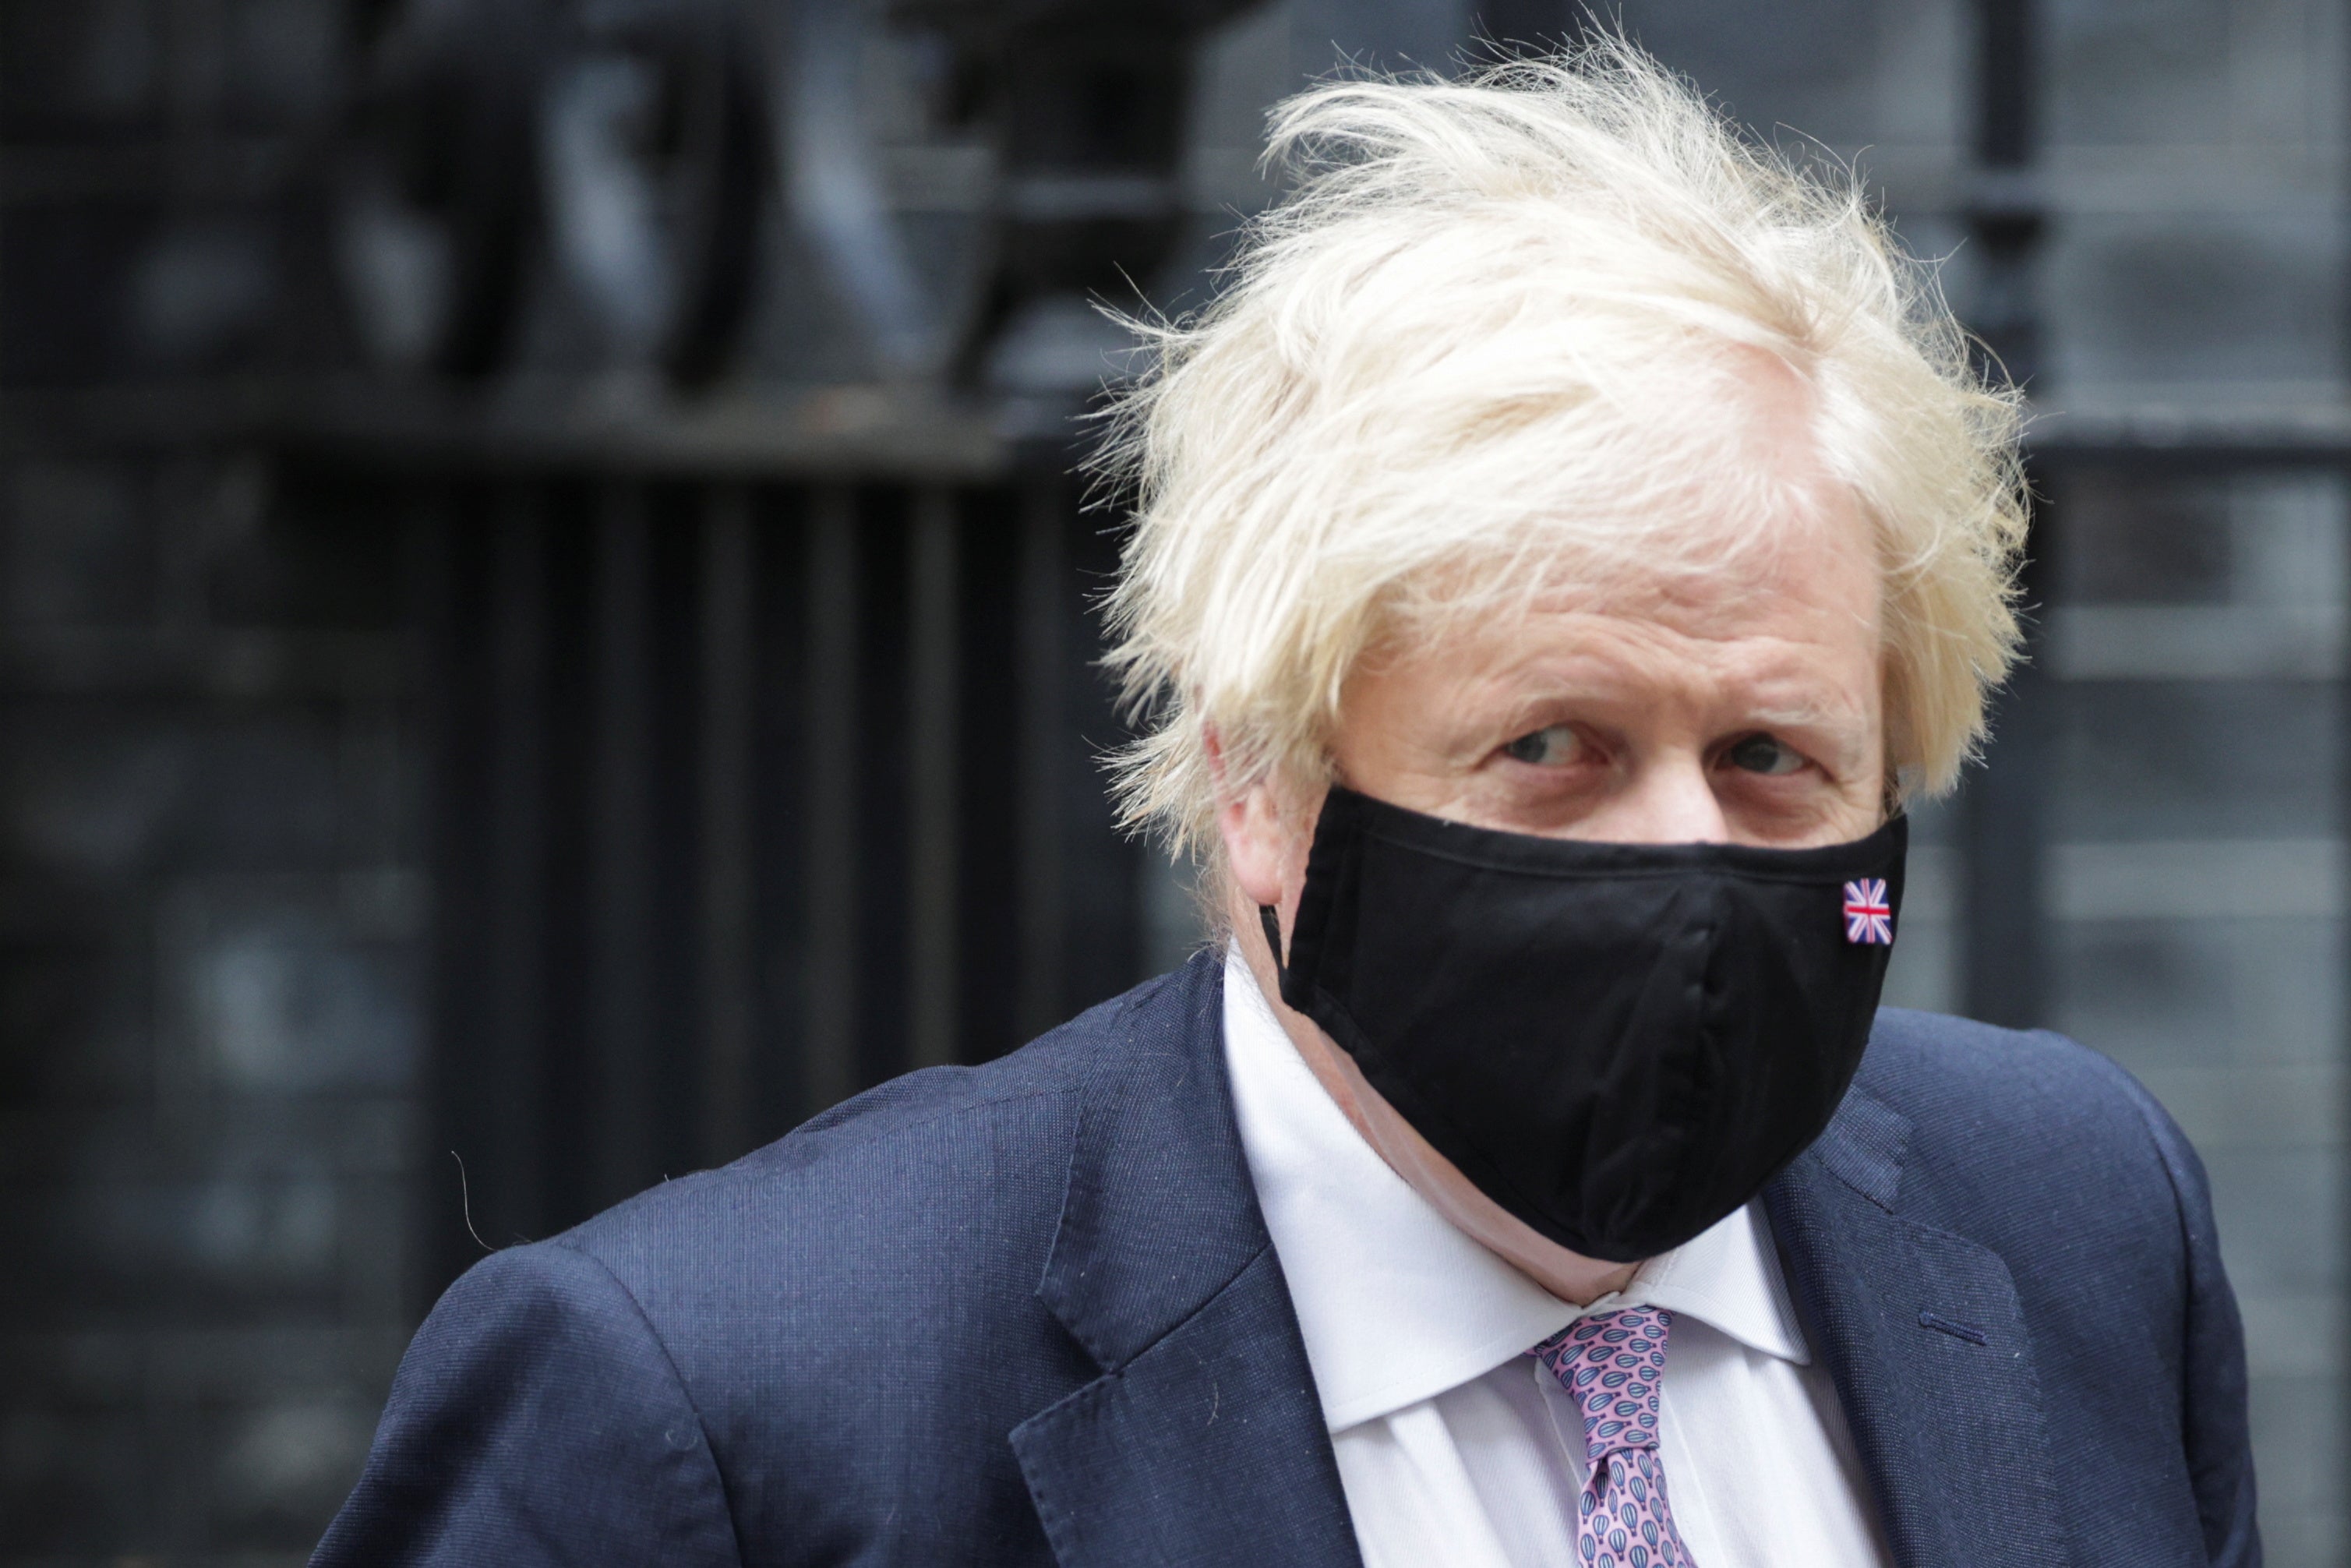 ‘Behind each mask lies another mask’ – Dominic Cummings on Boris Johnson